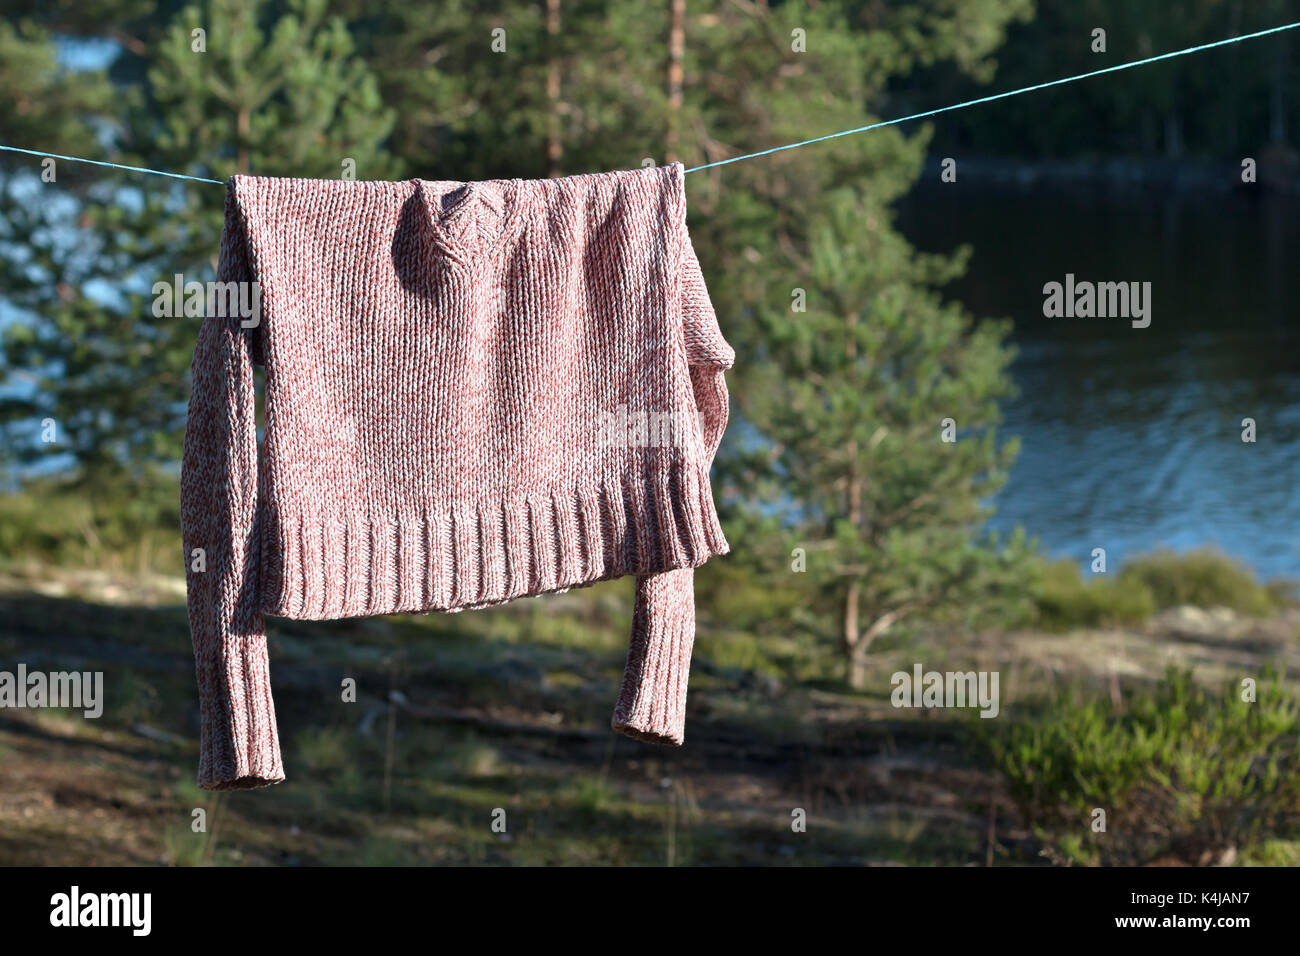 A pink knitted sweater is drying on a rope in the forest among the trees. Stock Photo